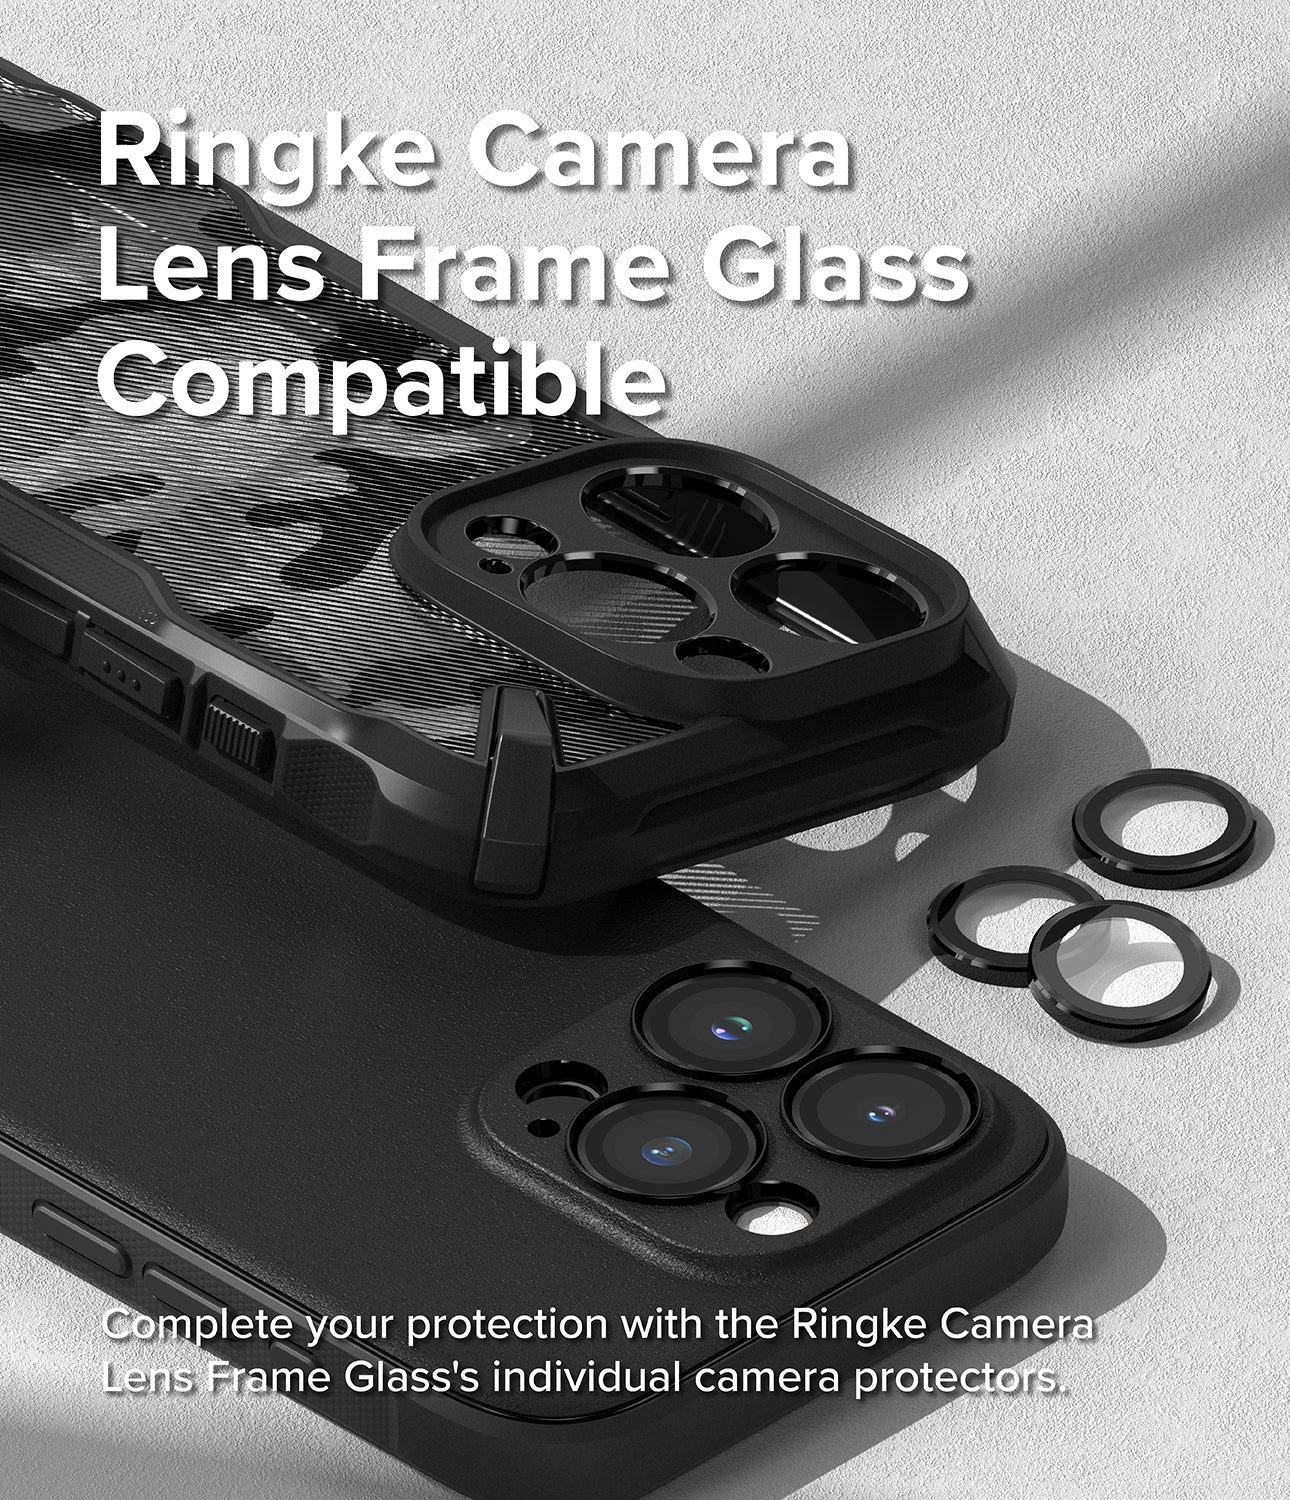 iPhone 15 Pro Max Case | Onyx Design - Action Painting- Ringke Camera Lens Frame Glass Compatible. Complete your protection with the Ringke Camera Lens Frame Glass' individual camera protectors.